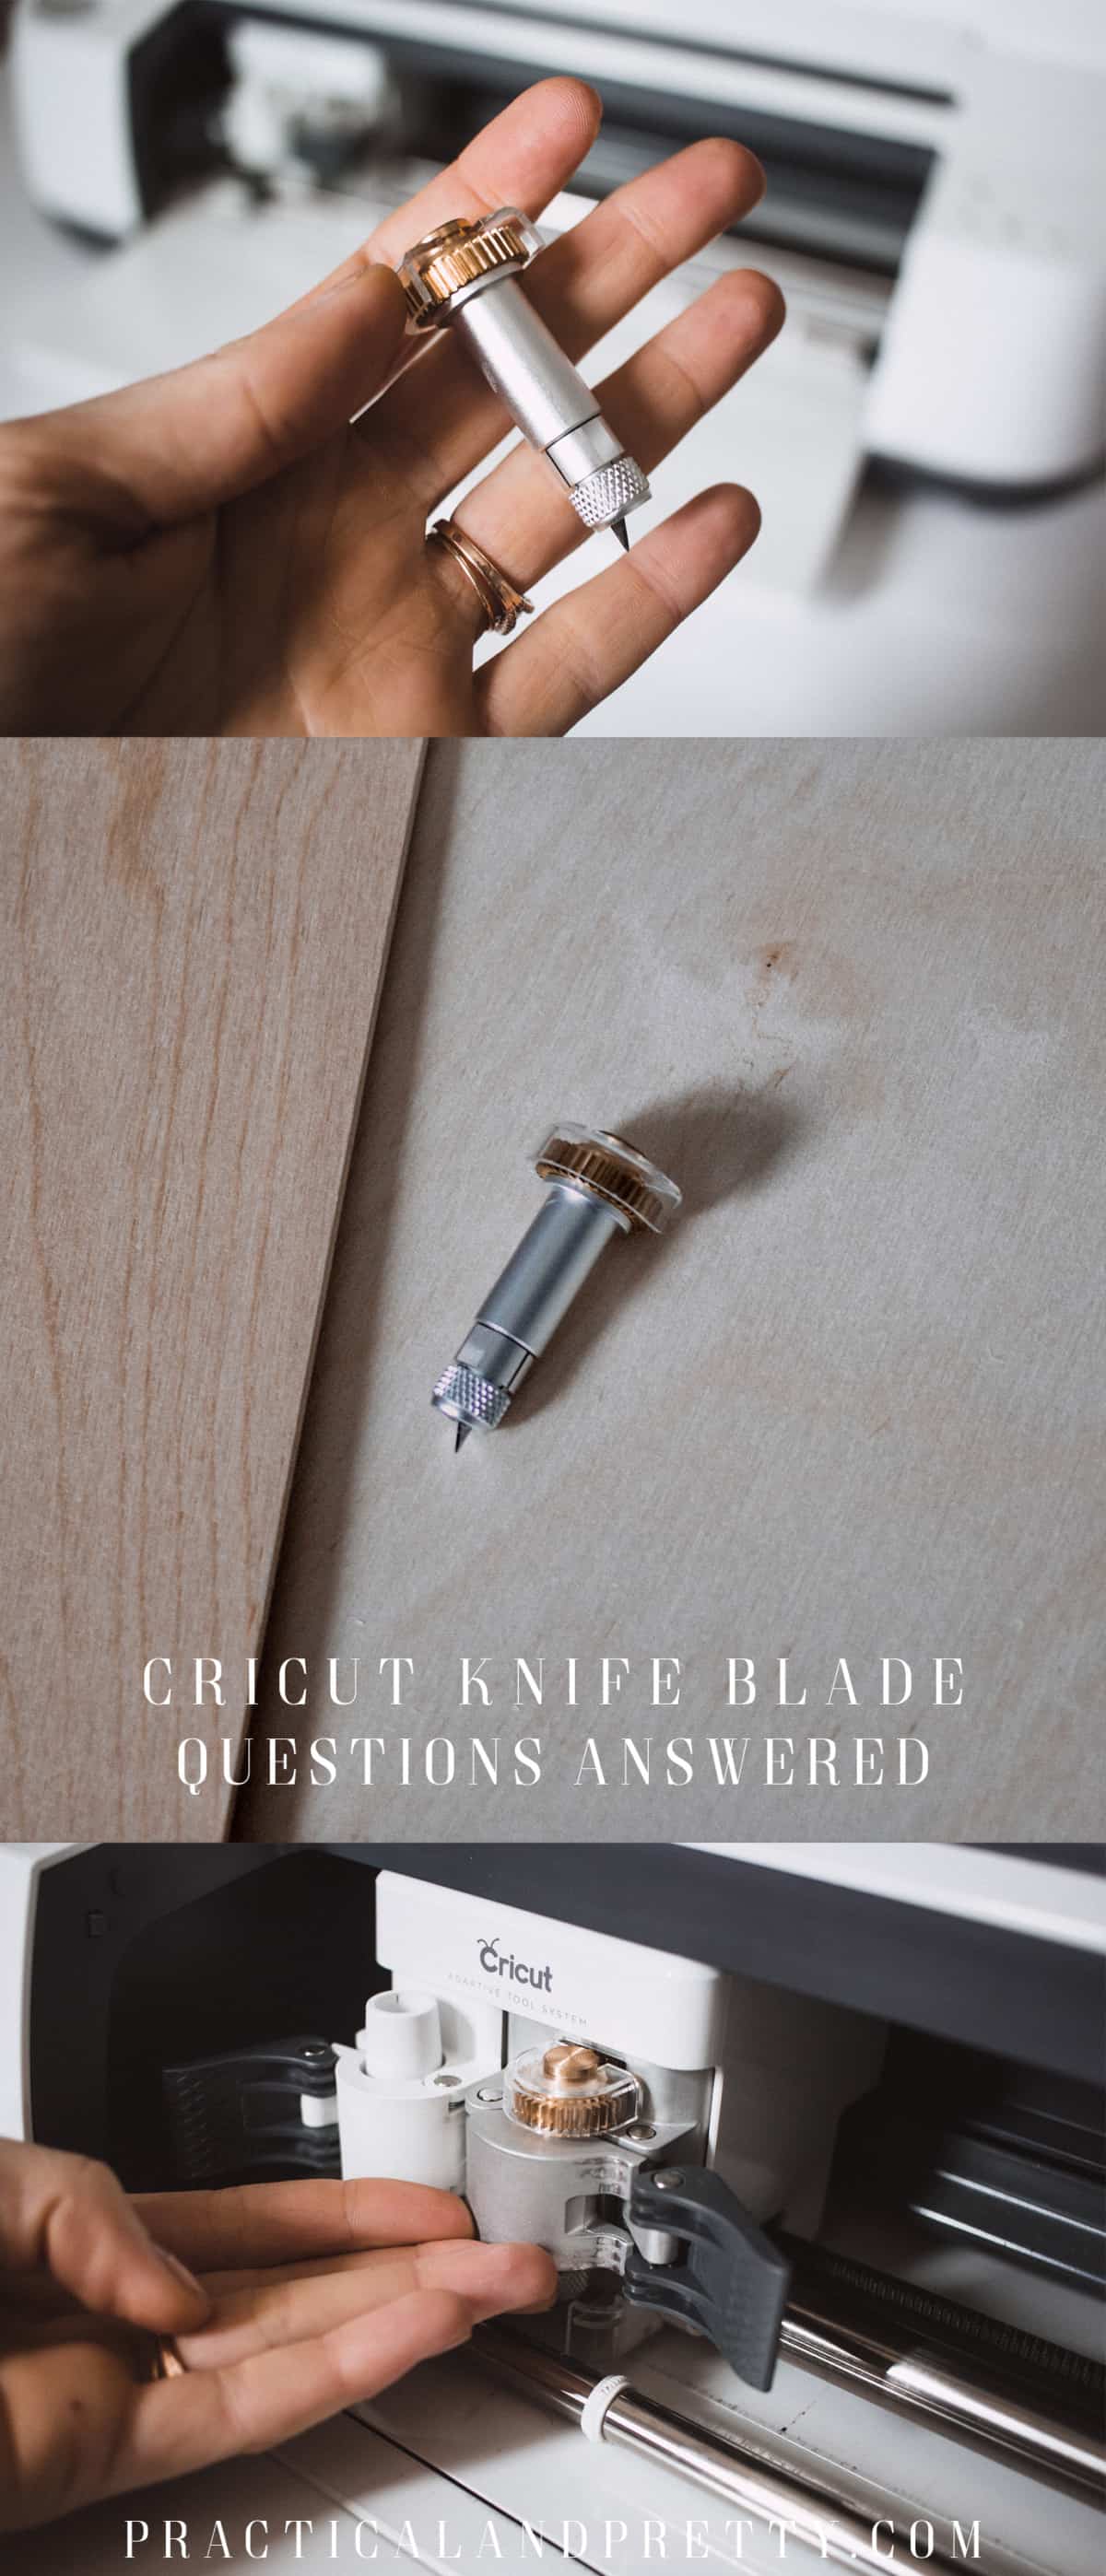 The Cricut Knife Blade is one of my most used tools and I answer all your questions here! The Cricut Maker can do anything you dream up.